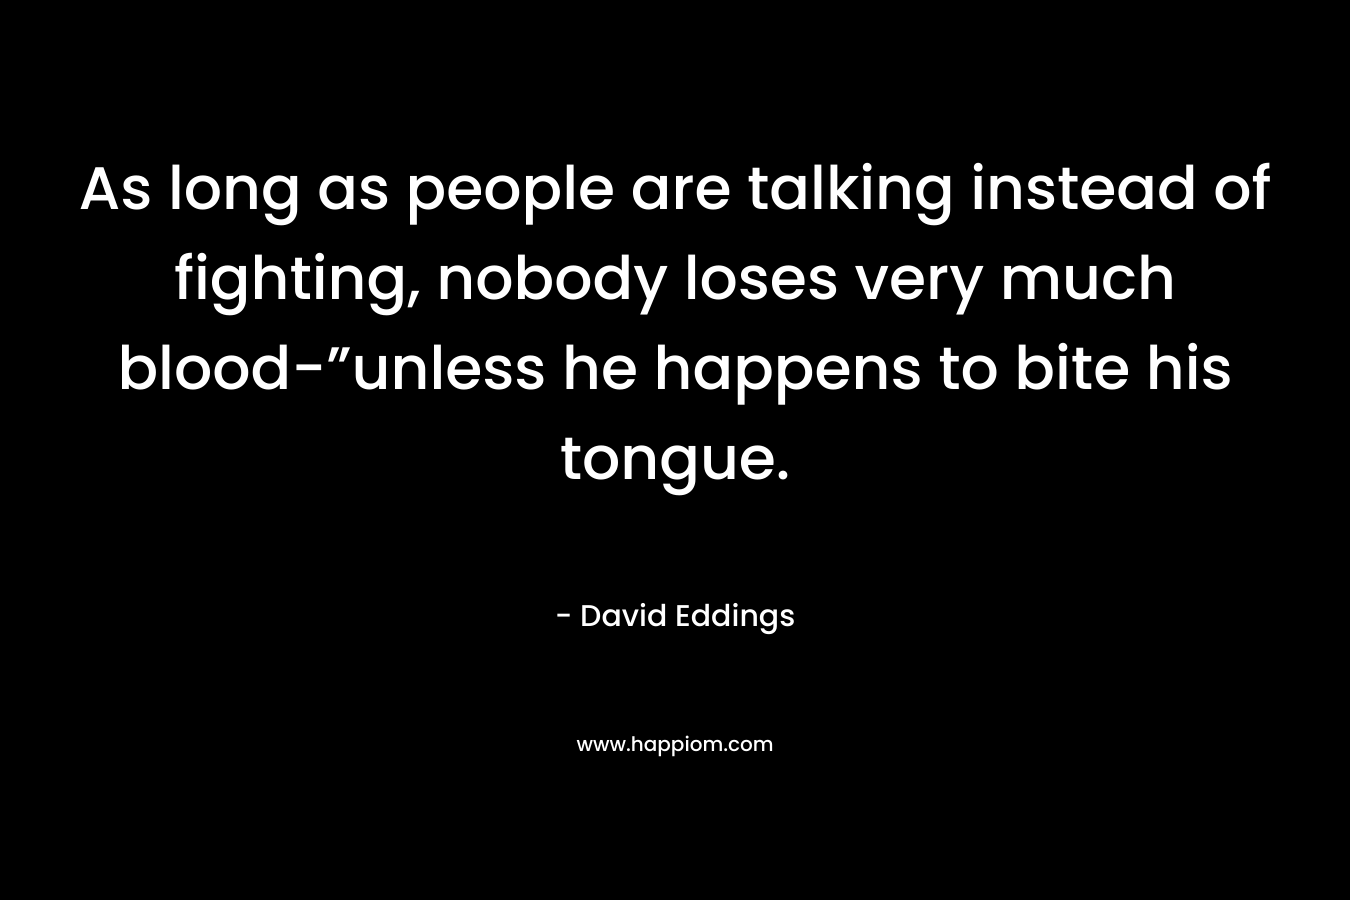 As long as people are talking instead of fighting, nobody loses very much blood-”unless he happens to bite his tongue. – David Eddings